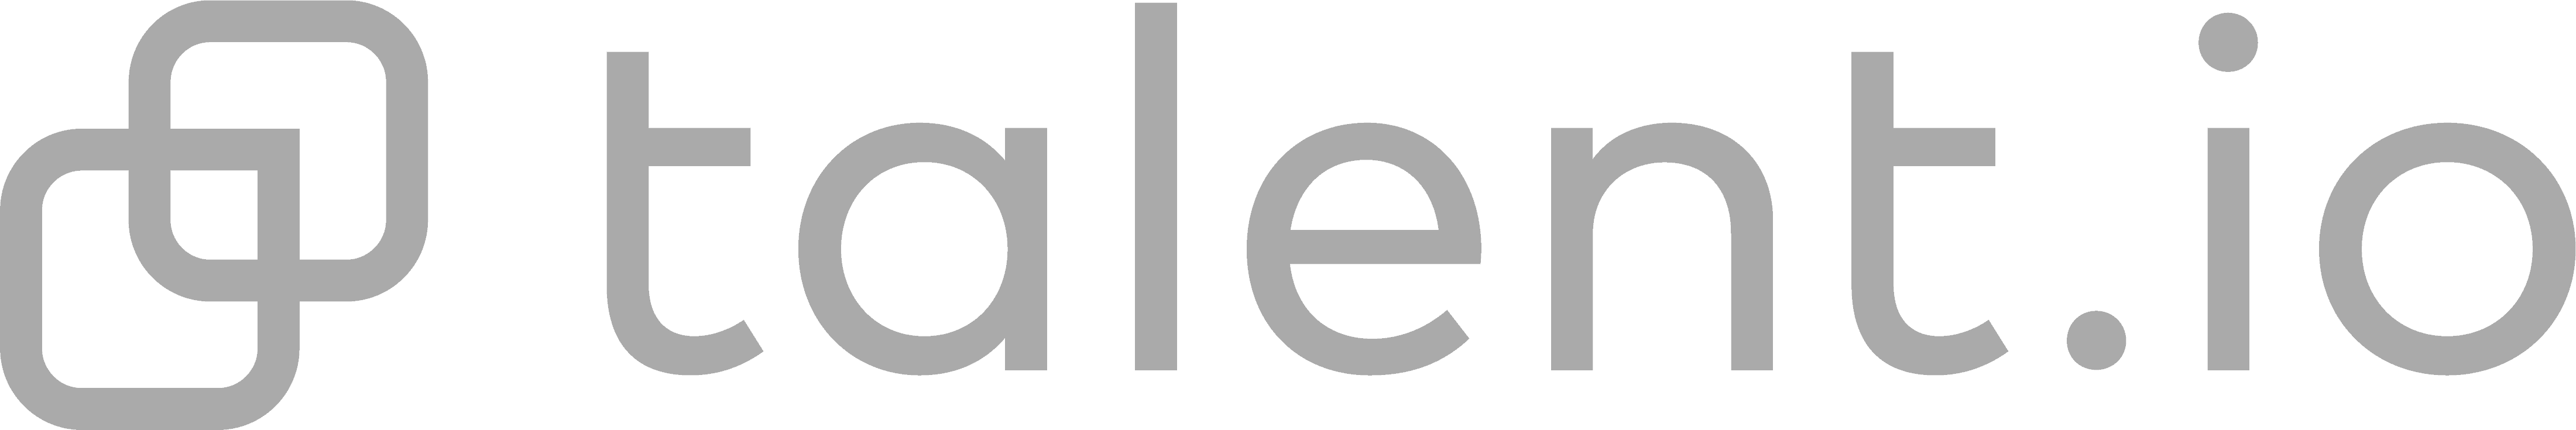 The image shows the logo for talent.io, featuring interlinked geometric shapes to the left of the text "talent.io" in a modern, sans-serif font.